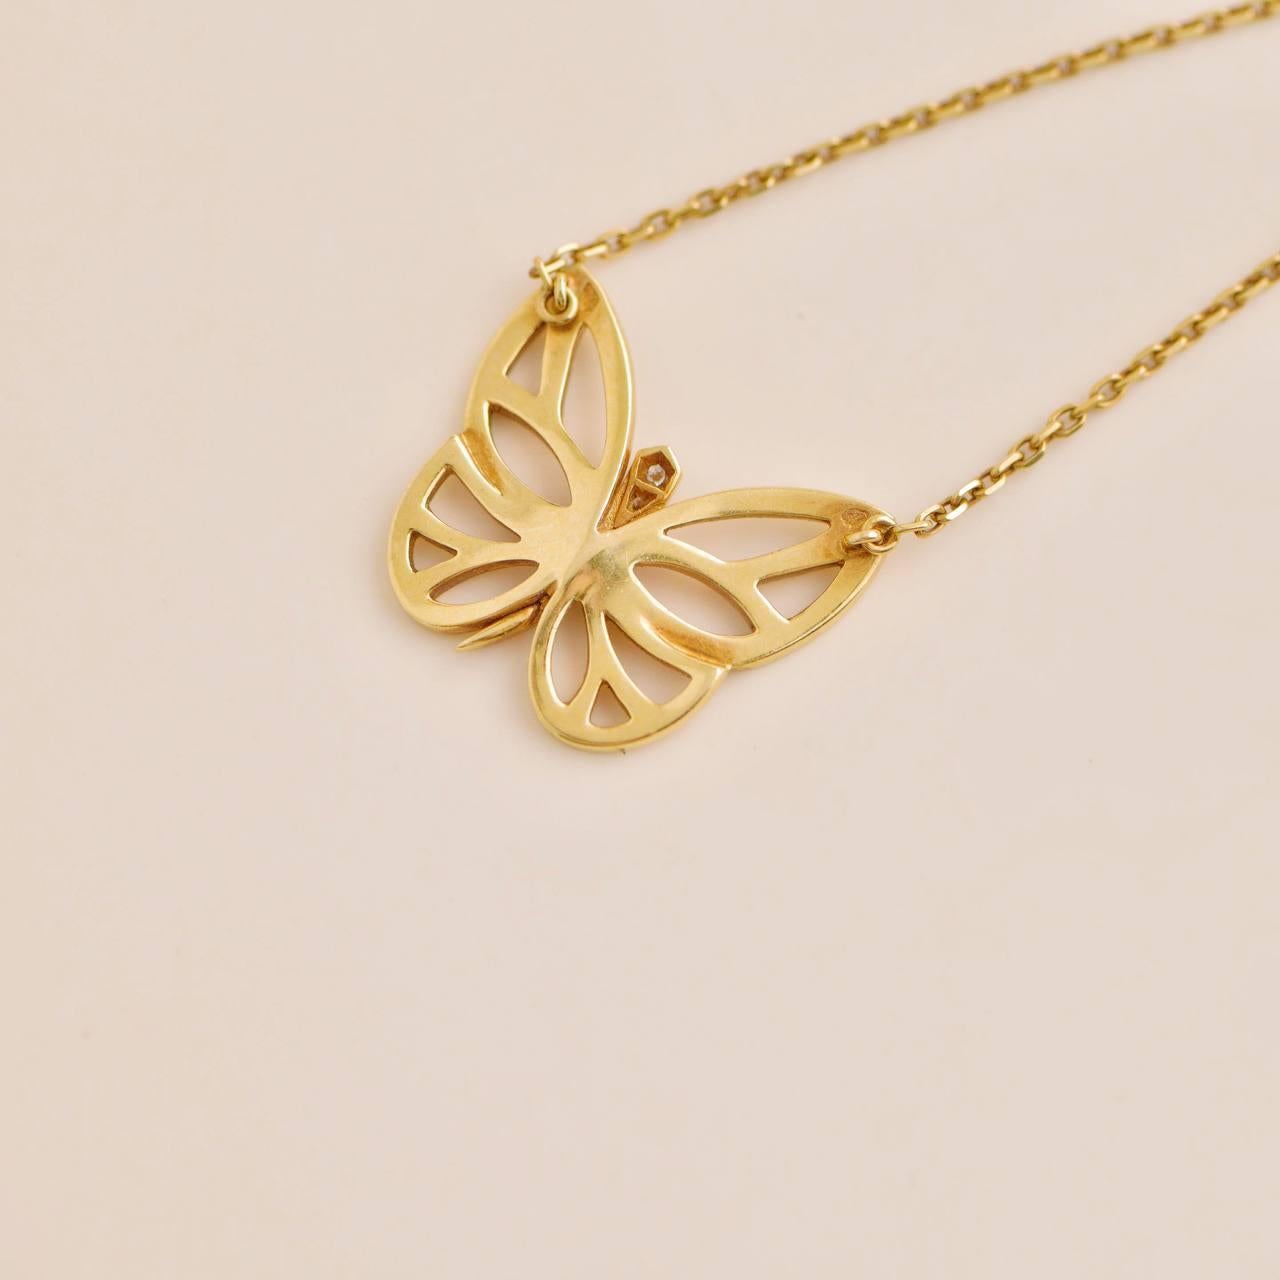 Van Cleef & Arpels 18K Yellow Gold Diamond Butterfly Pendant Necklace In Excellent Condition For Sale In Banbury, GB